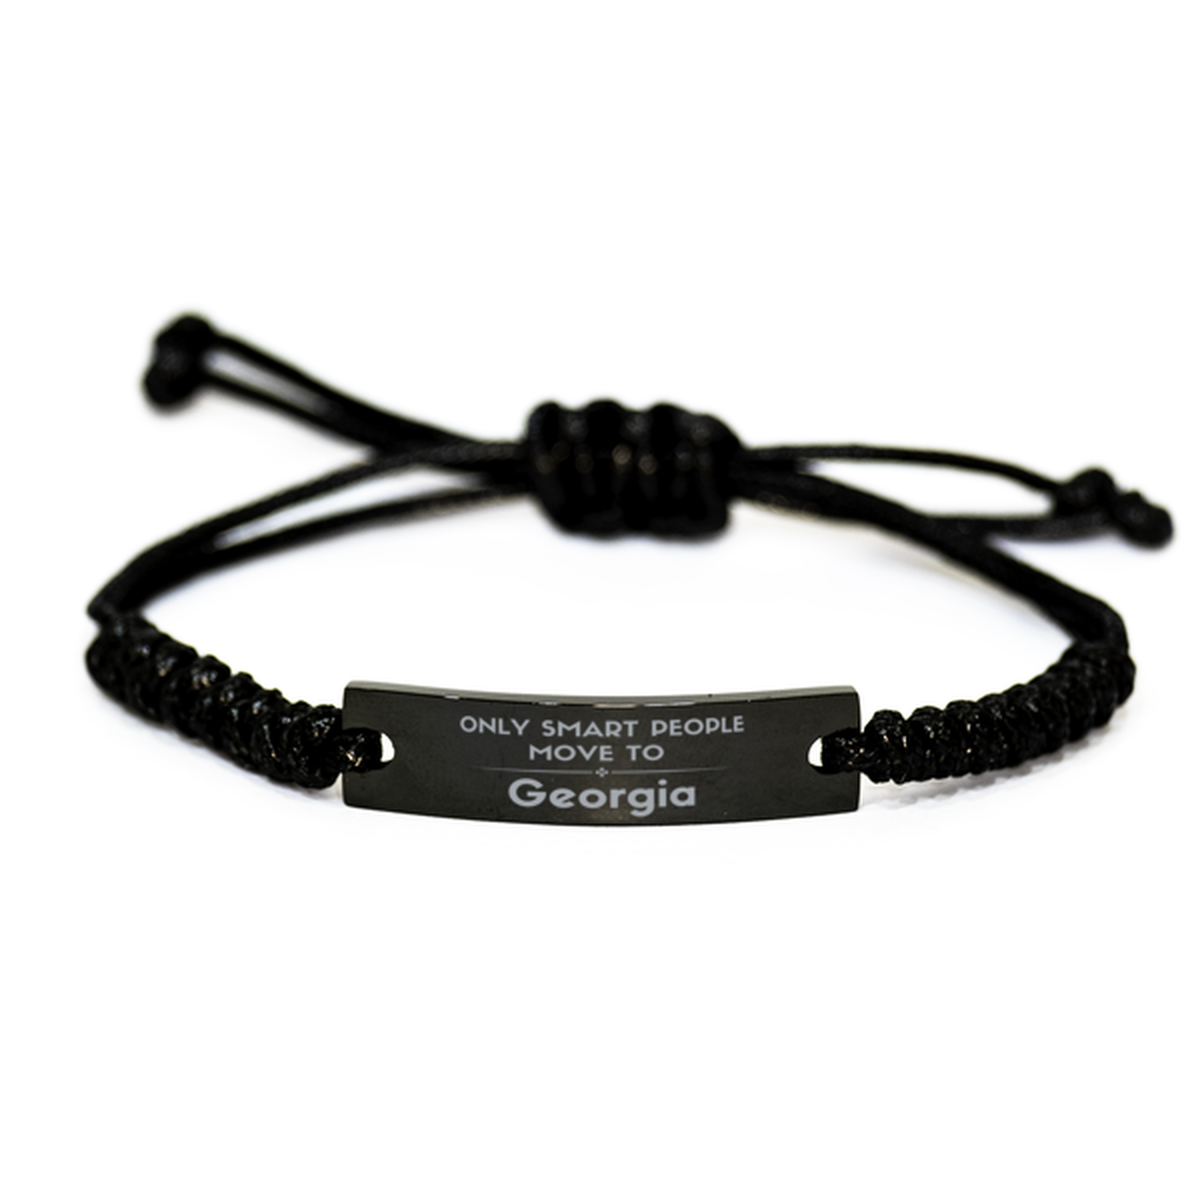 Only smart people move to Georgia Black Rope Bracelet, Gag Gifts For Georgia, Move to Georgia Gifts for Friends Coworker Funny Saying Quote